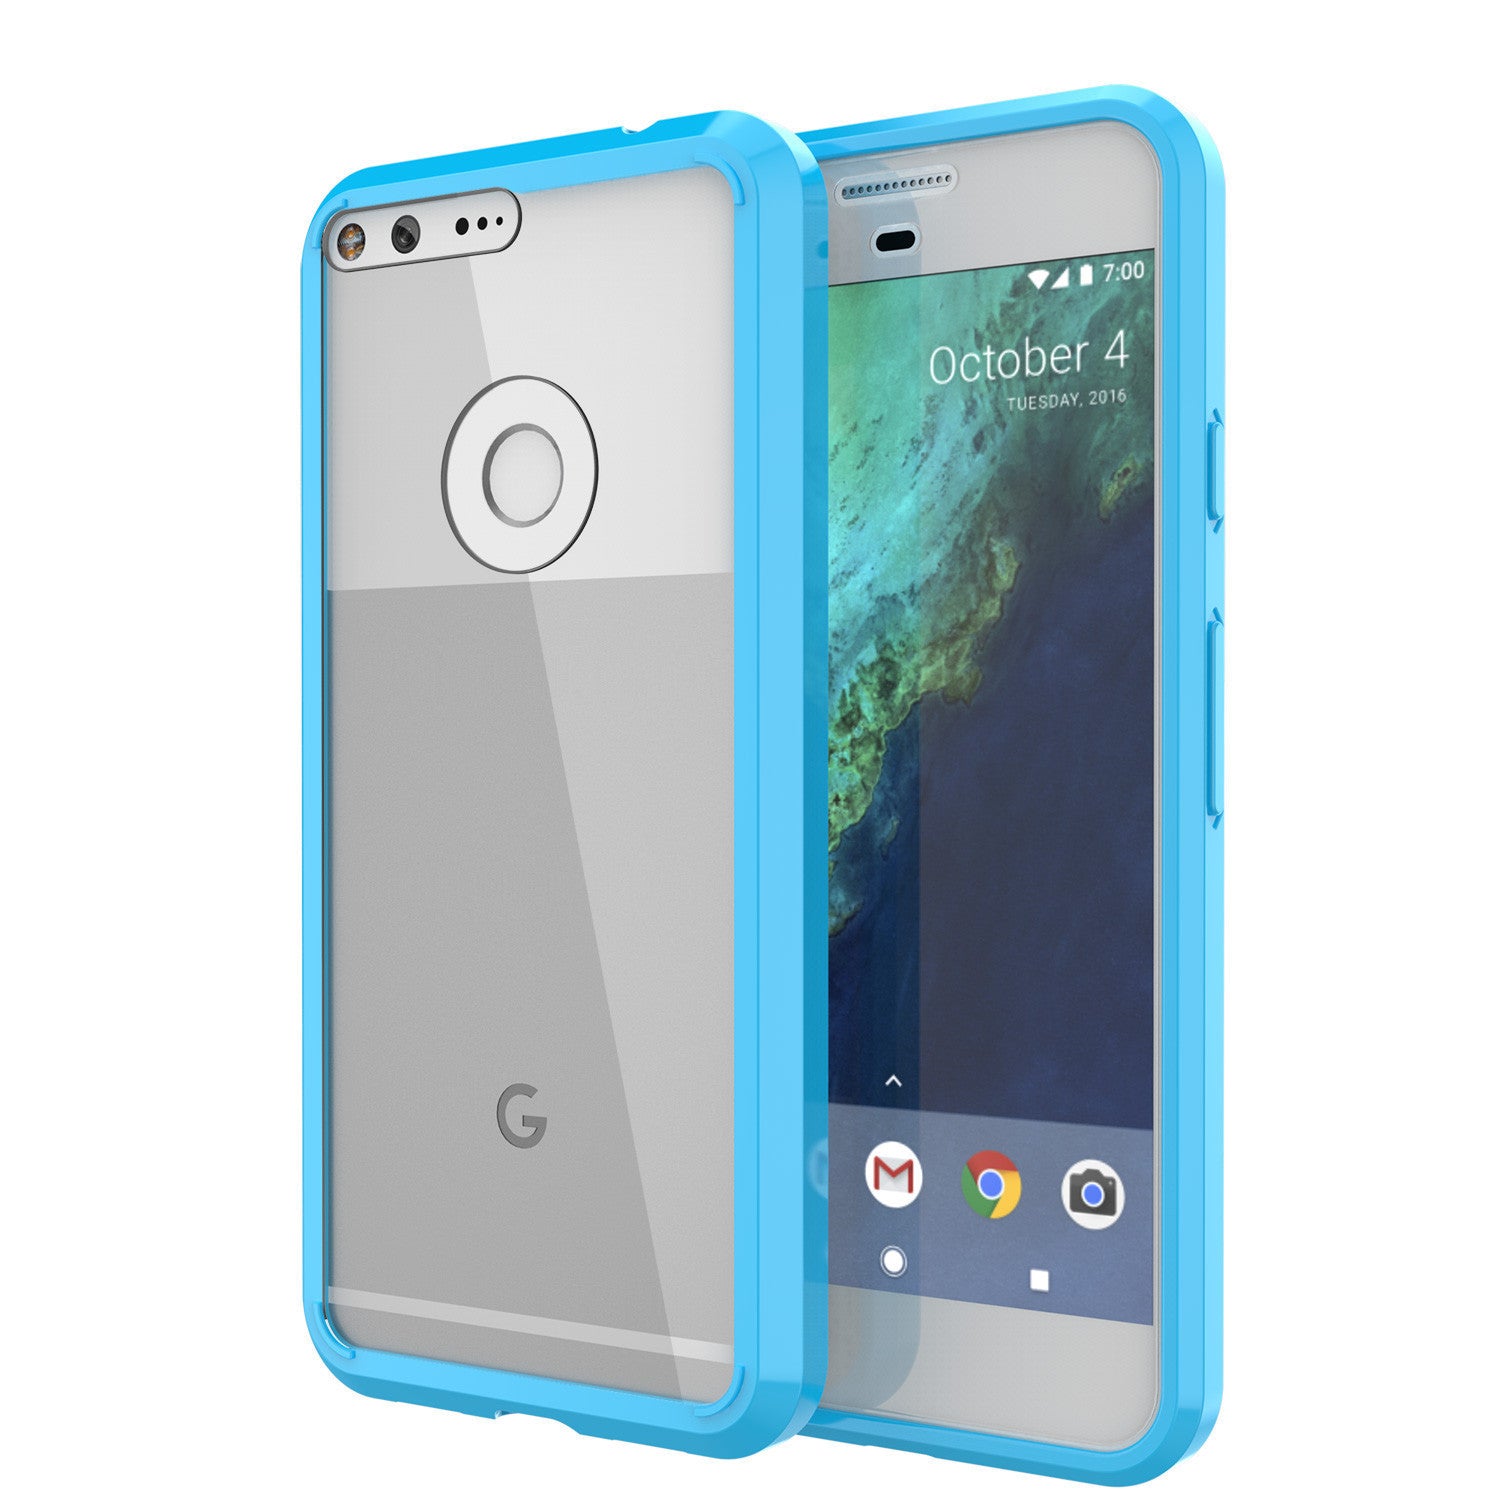 Google Pixel XL Case Punkcase® LUCID 2.0 Light Blue Series w/ PUNK SHIELD Glass Screen Protector | Ultra Fit (Color in image: light blue)